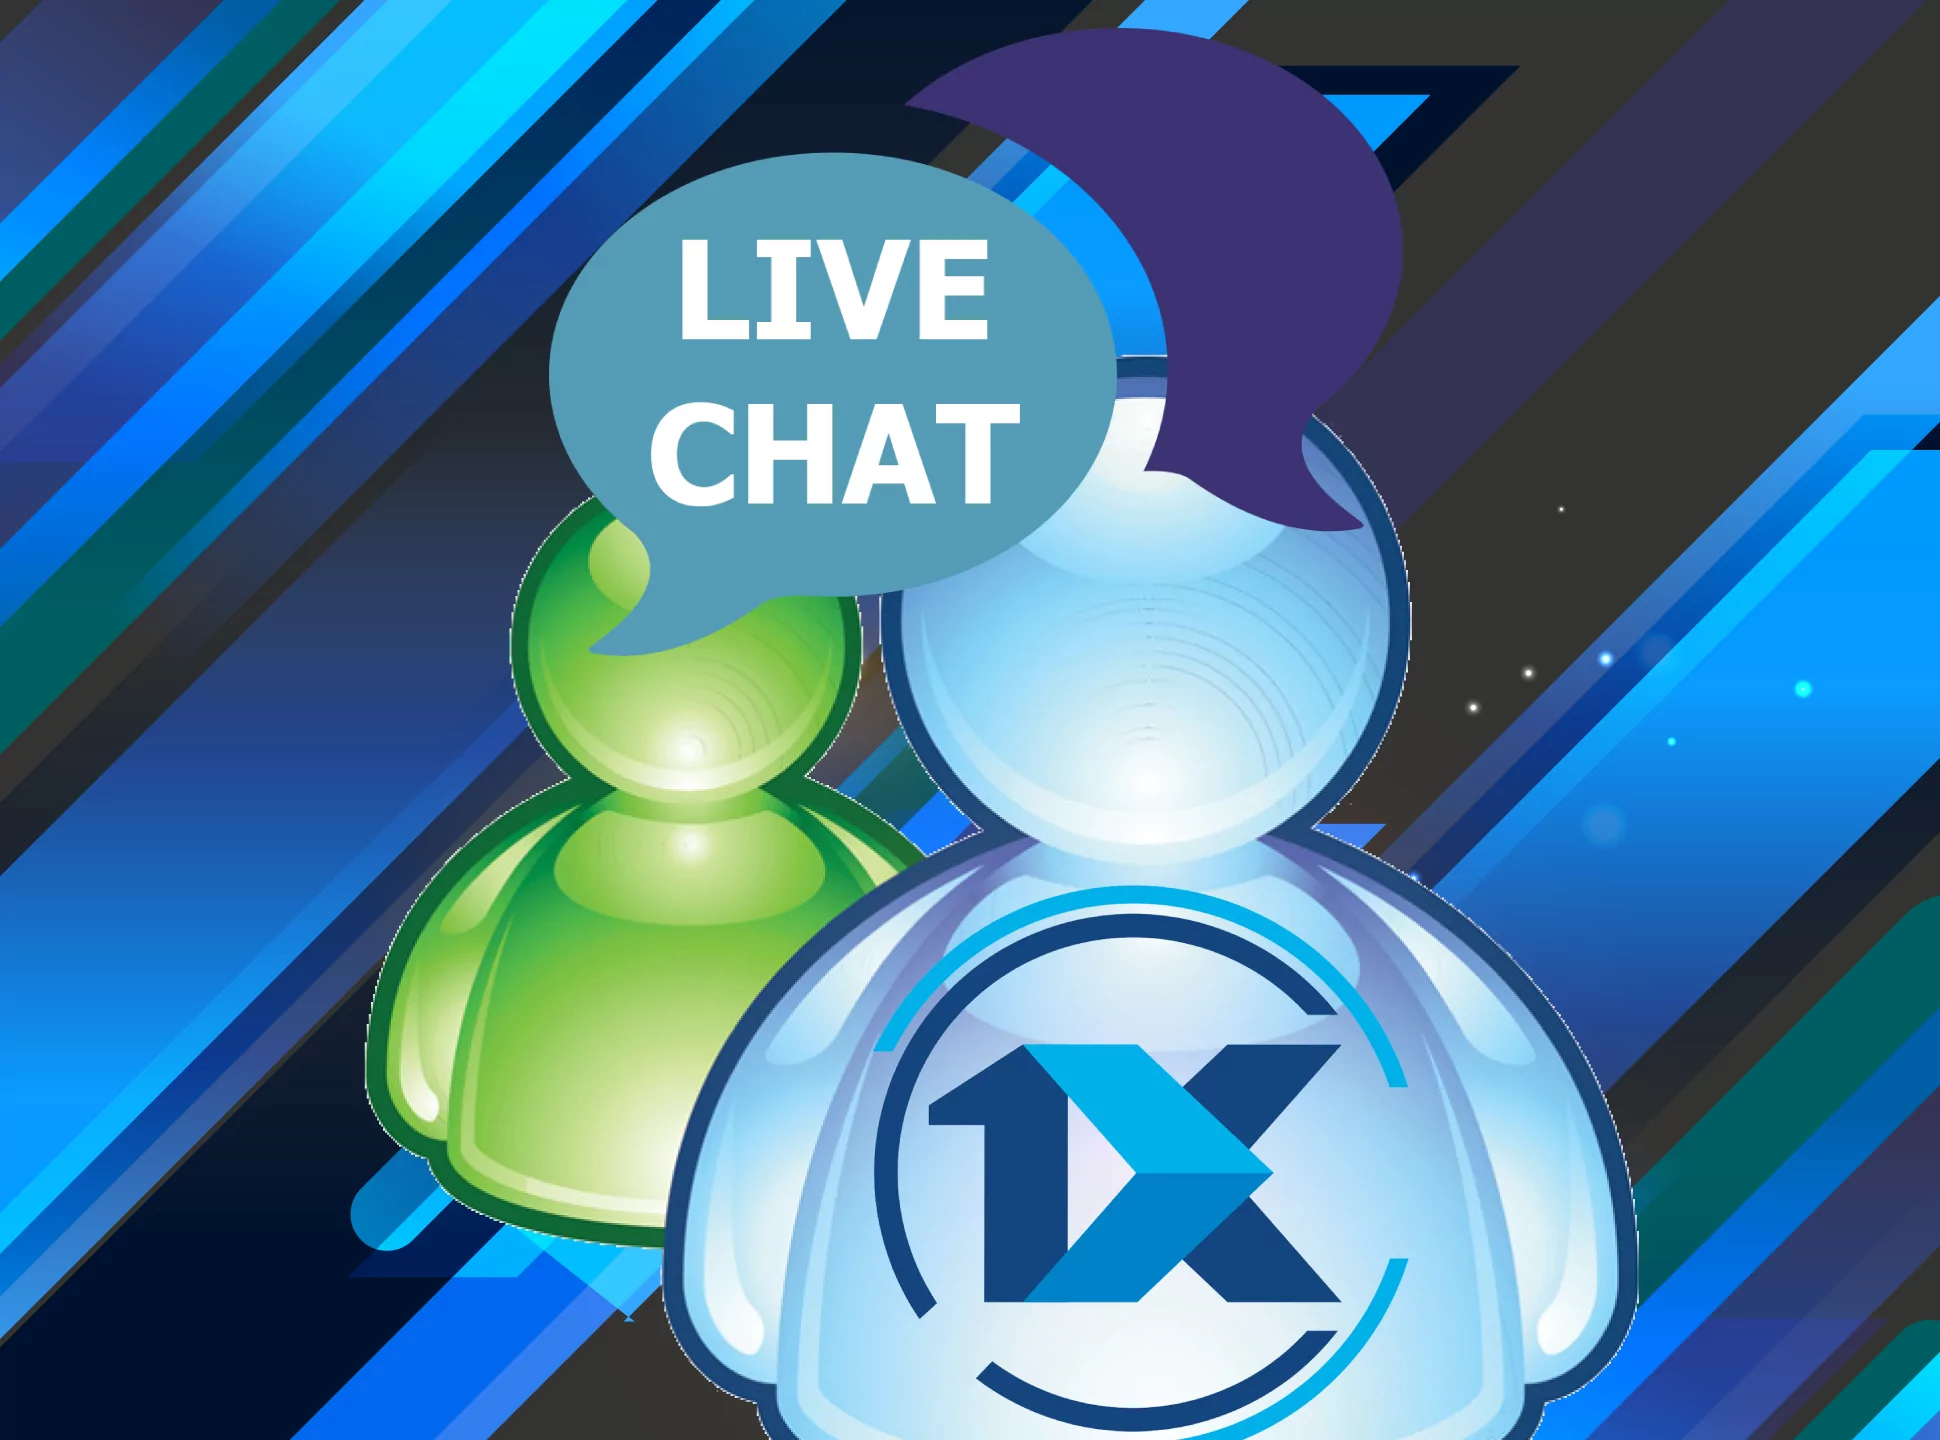 1xBet has an online chat on its site for urgent questions.